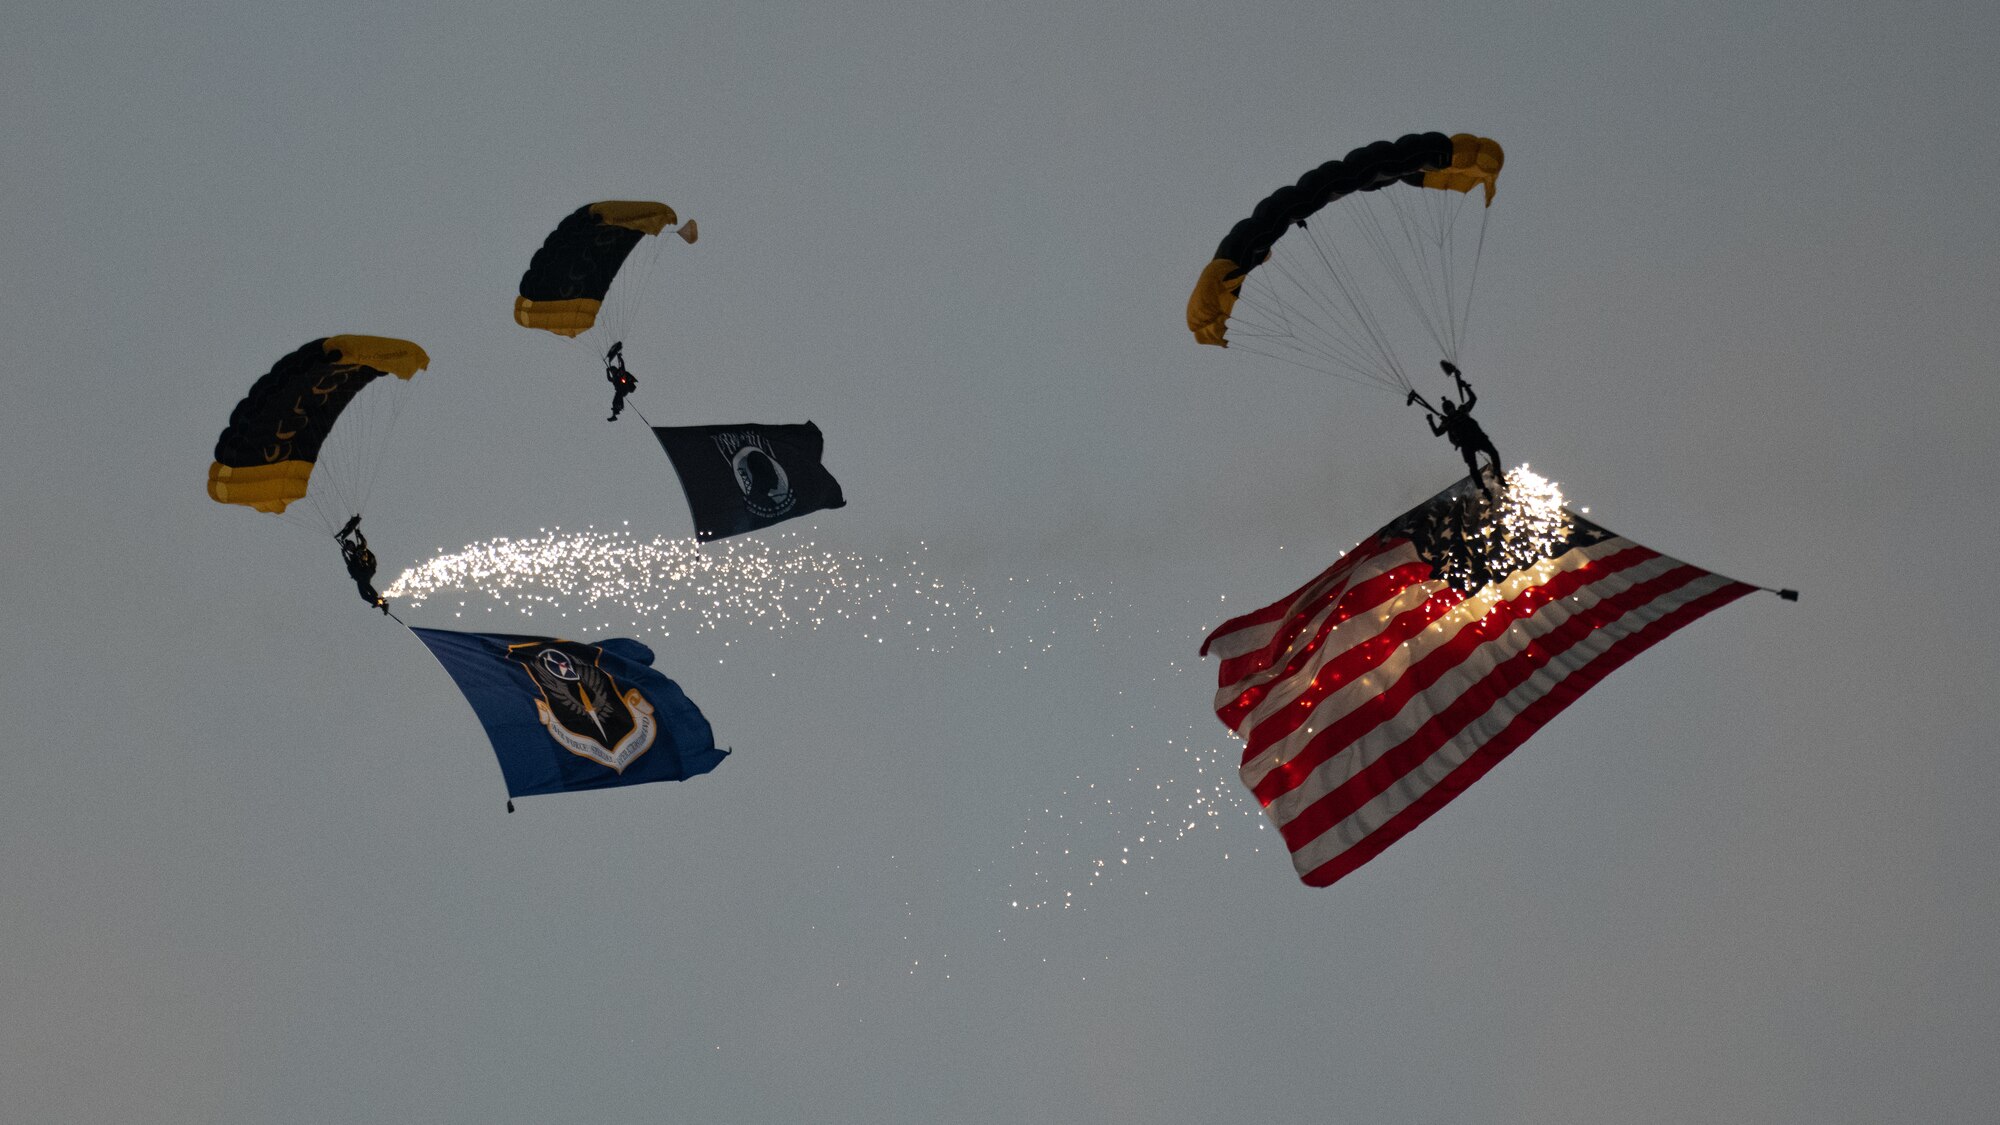 3 Special Tactics operators descend by combat parachute trailing sparklers and the United States flag along with the Air Force Special Operations Command flags.